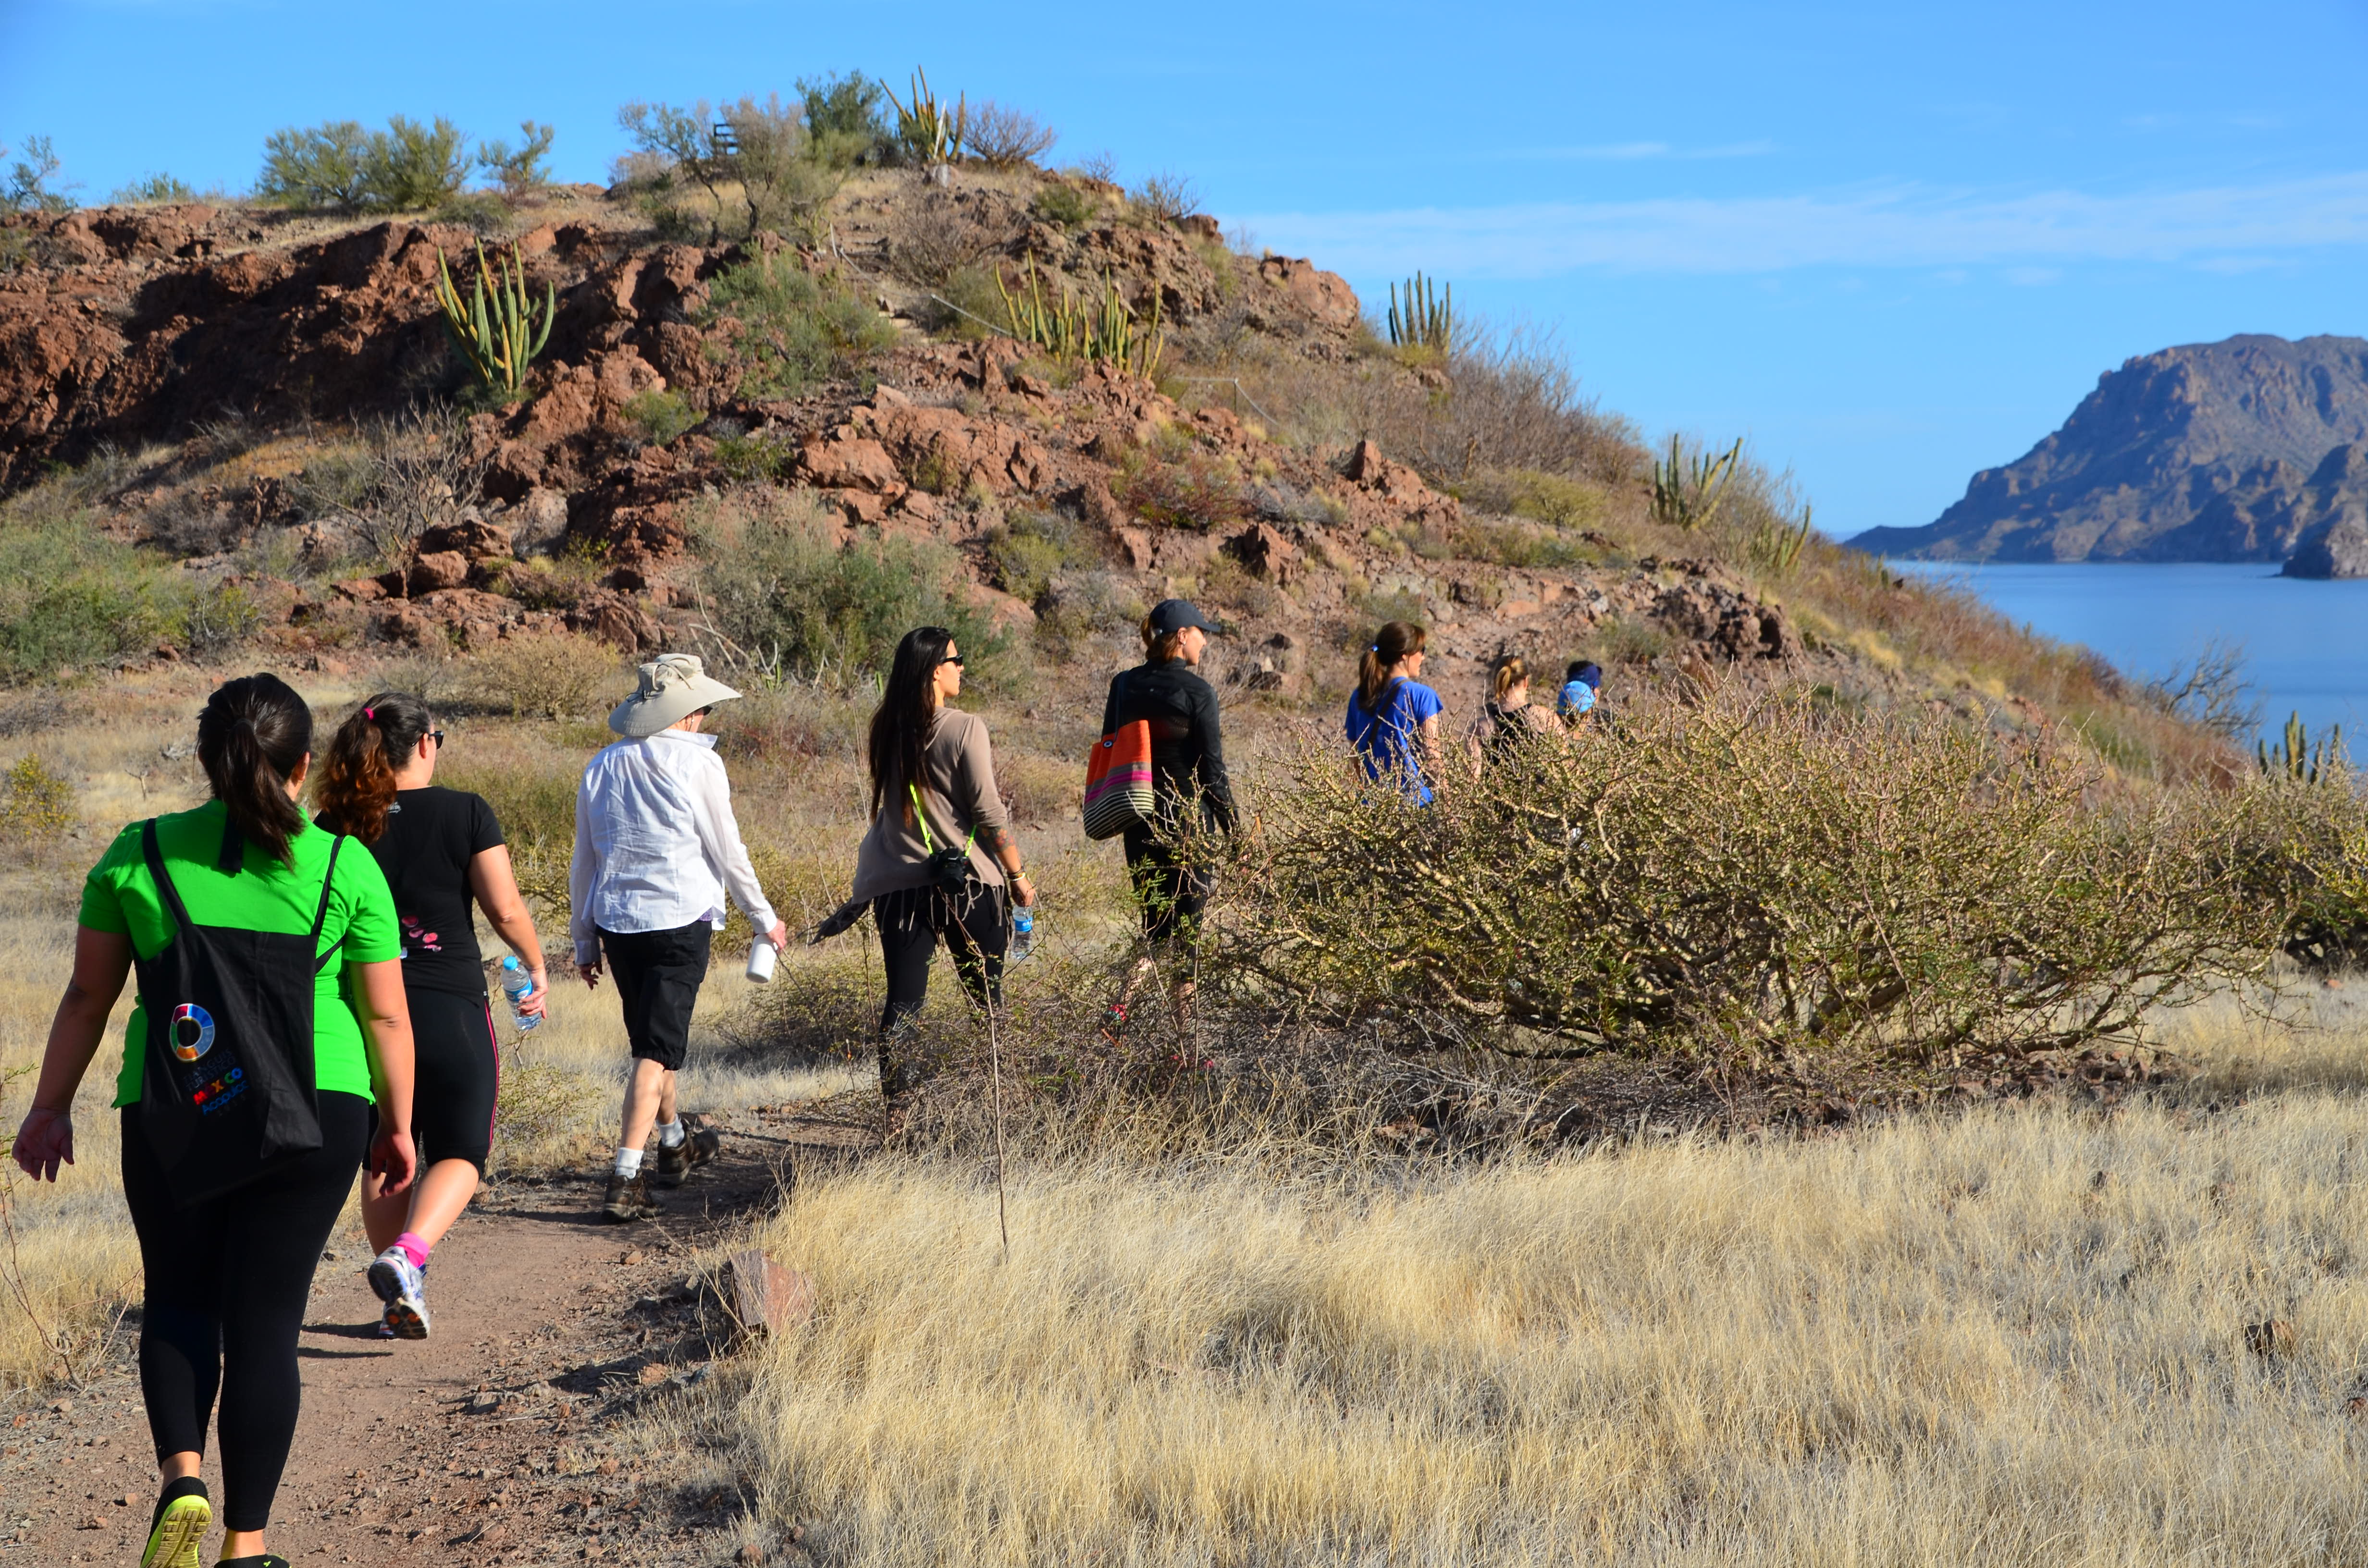 Morning hikes at the Villa del Palmar Resort and Spa take guests up into the hills on well marked trails for a bird’s eye view of the ocean, bay and hotel. Desert plants are marked, and Google Earth trail markers show hikers exactly where they are. Photos by Jerry Ondash